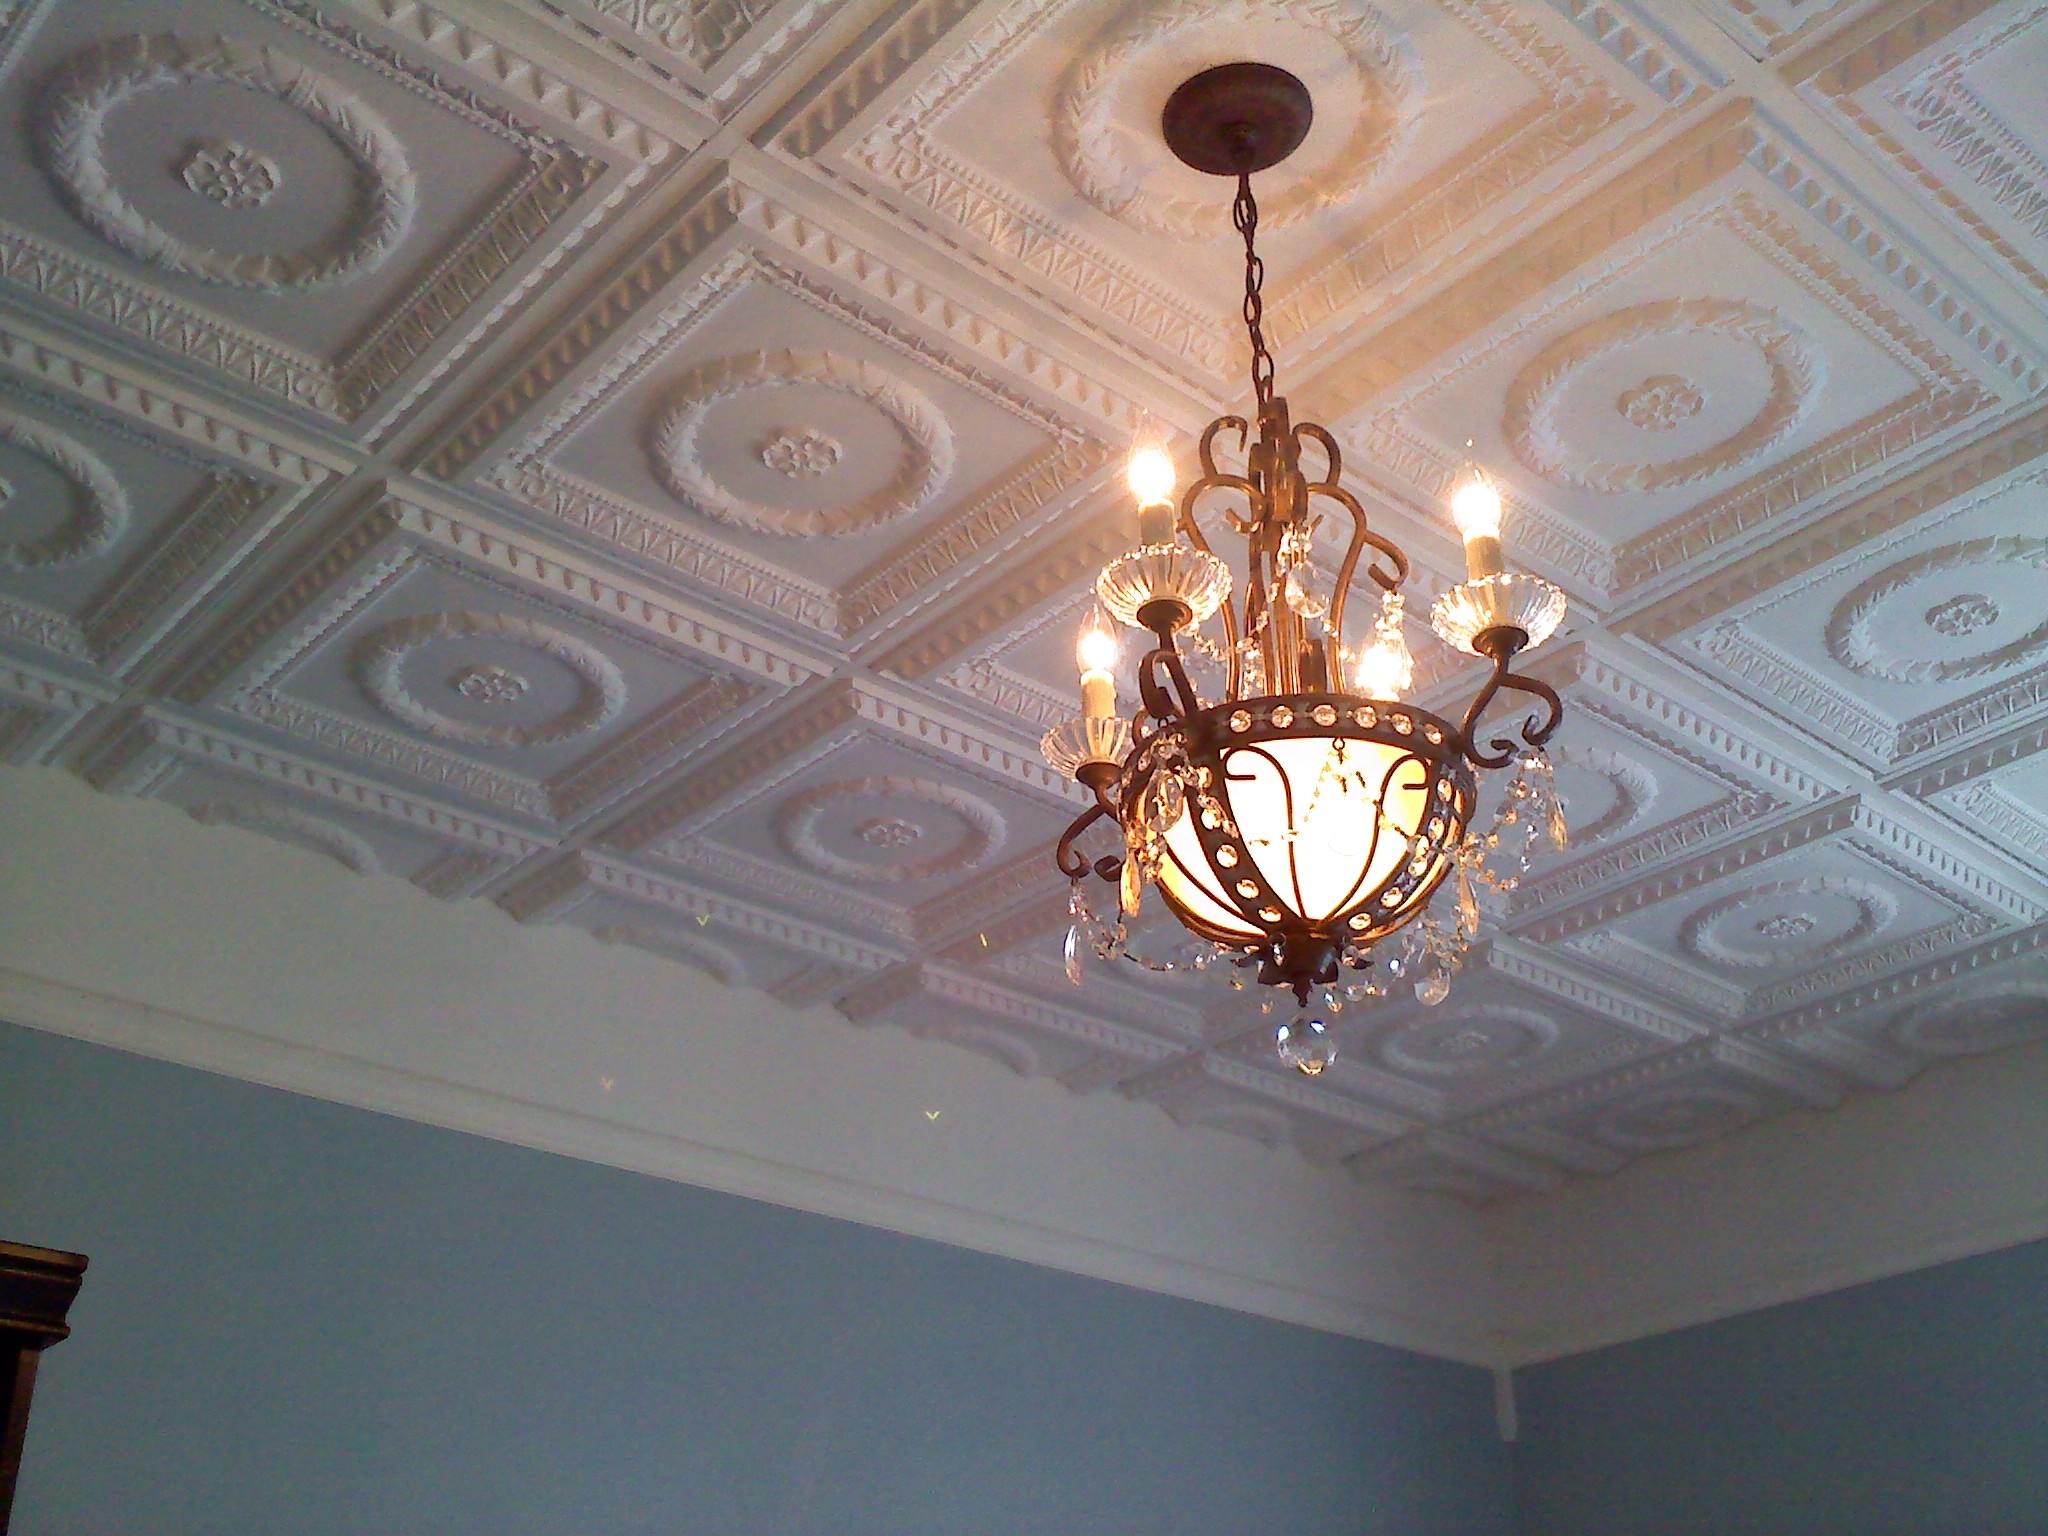 Permalink to Plaster Moulded Decorative Ceiling Tiles